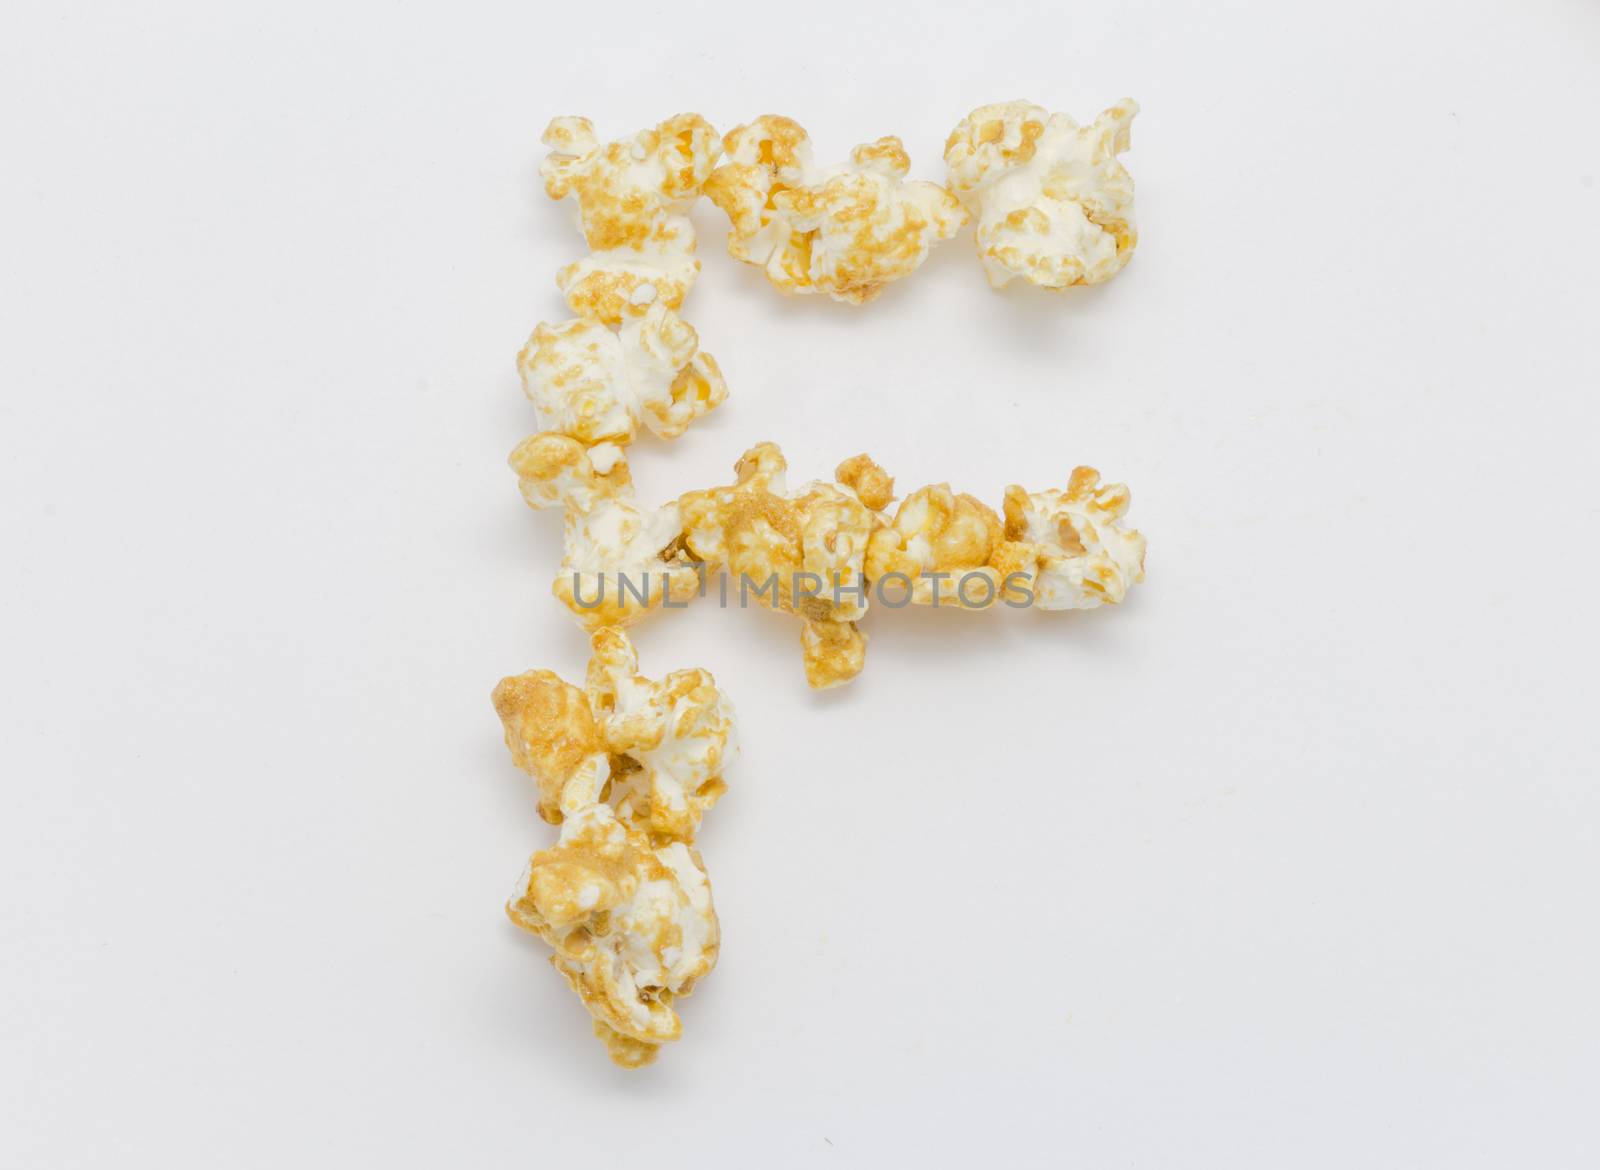 pop corn forming letter F isolated on white background